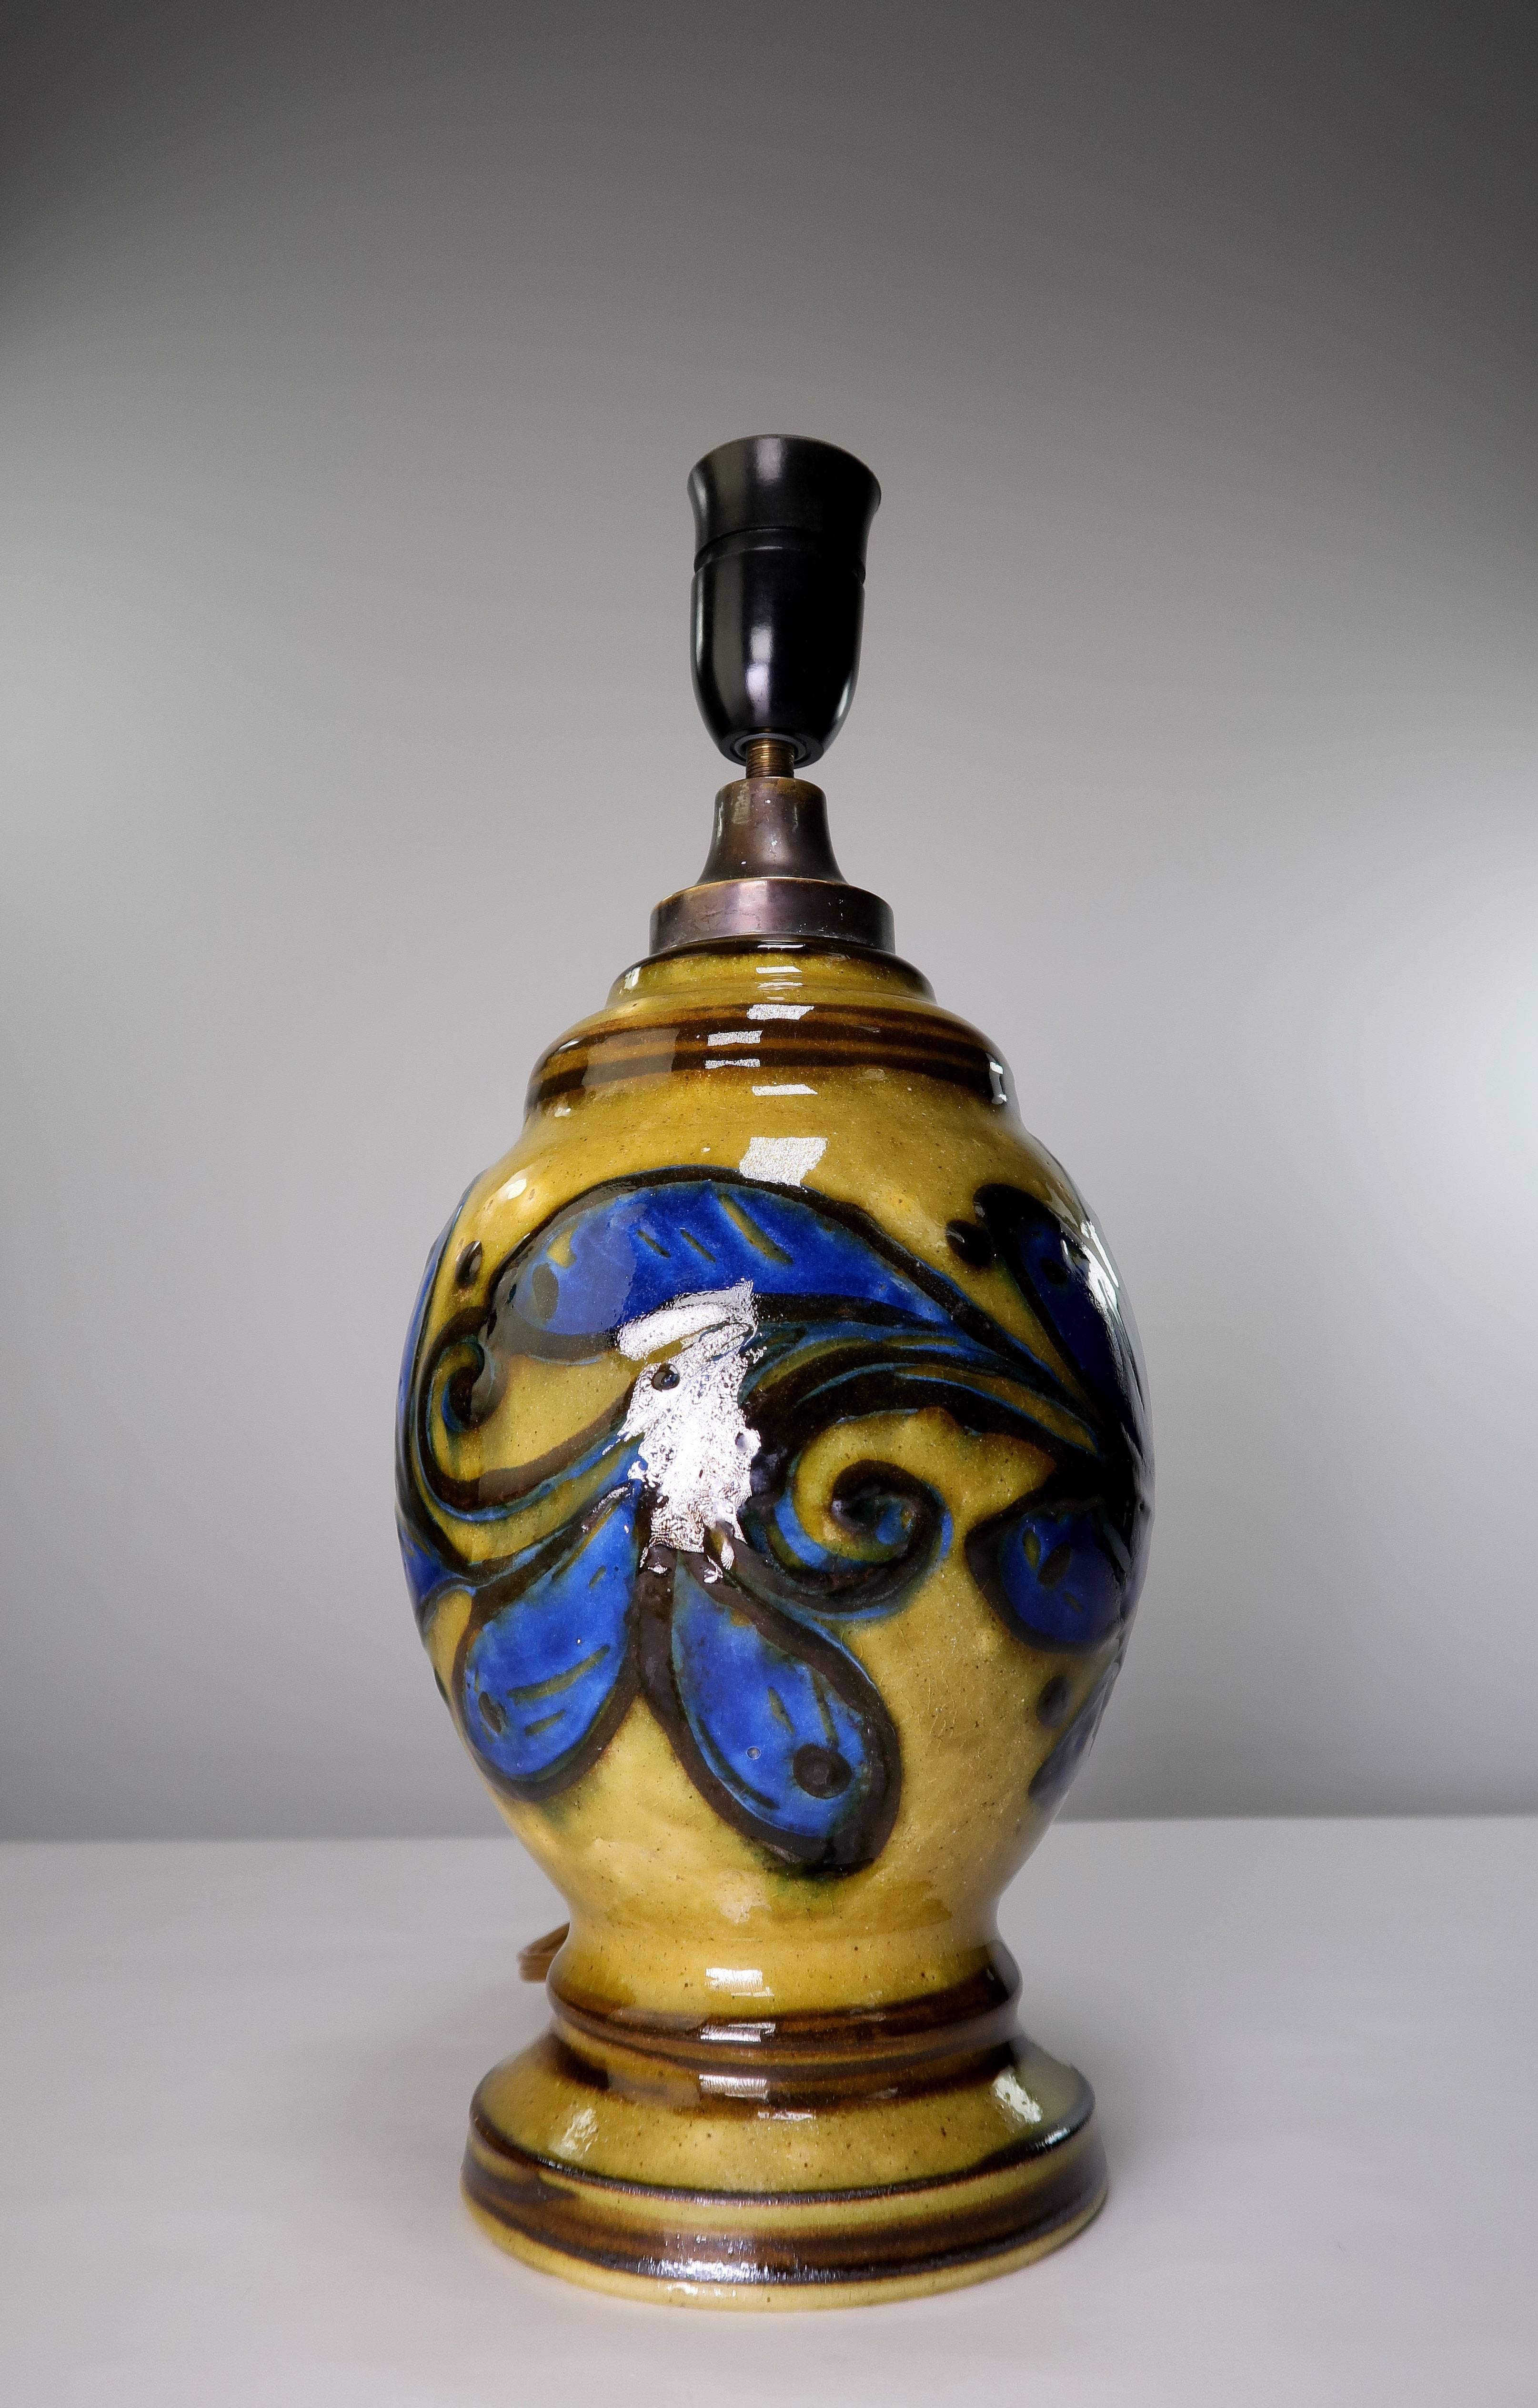 Unique, colorful Danish Art Deco bohemian style midcentury handmade and hand decorated table lamp by Kähler in the 1930s. An abstract floral motif in a clear cobalt blue upon mustard ochre glaze with dark brown lines to accentuate the shape around